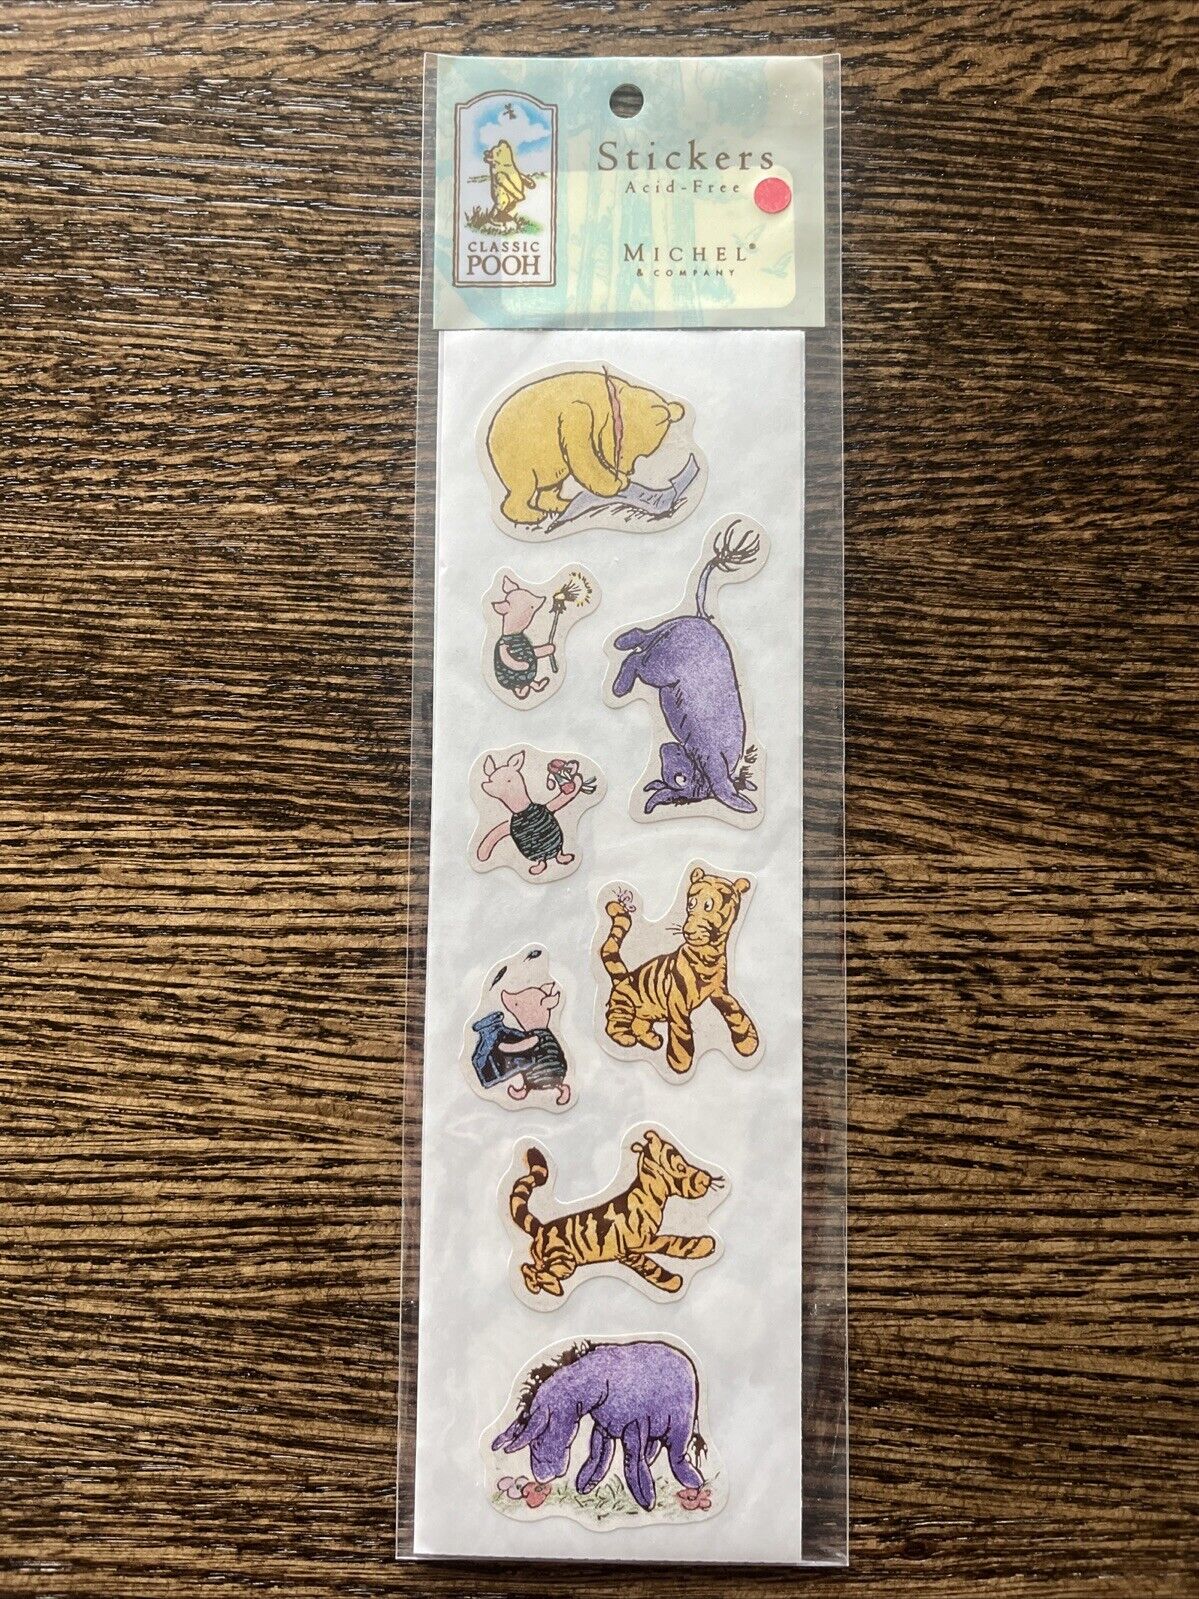 Michel & Co. Classic Pooh Acid Free Stickers #5277S